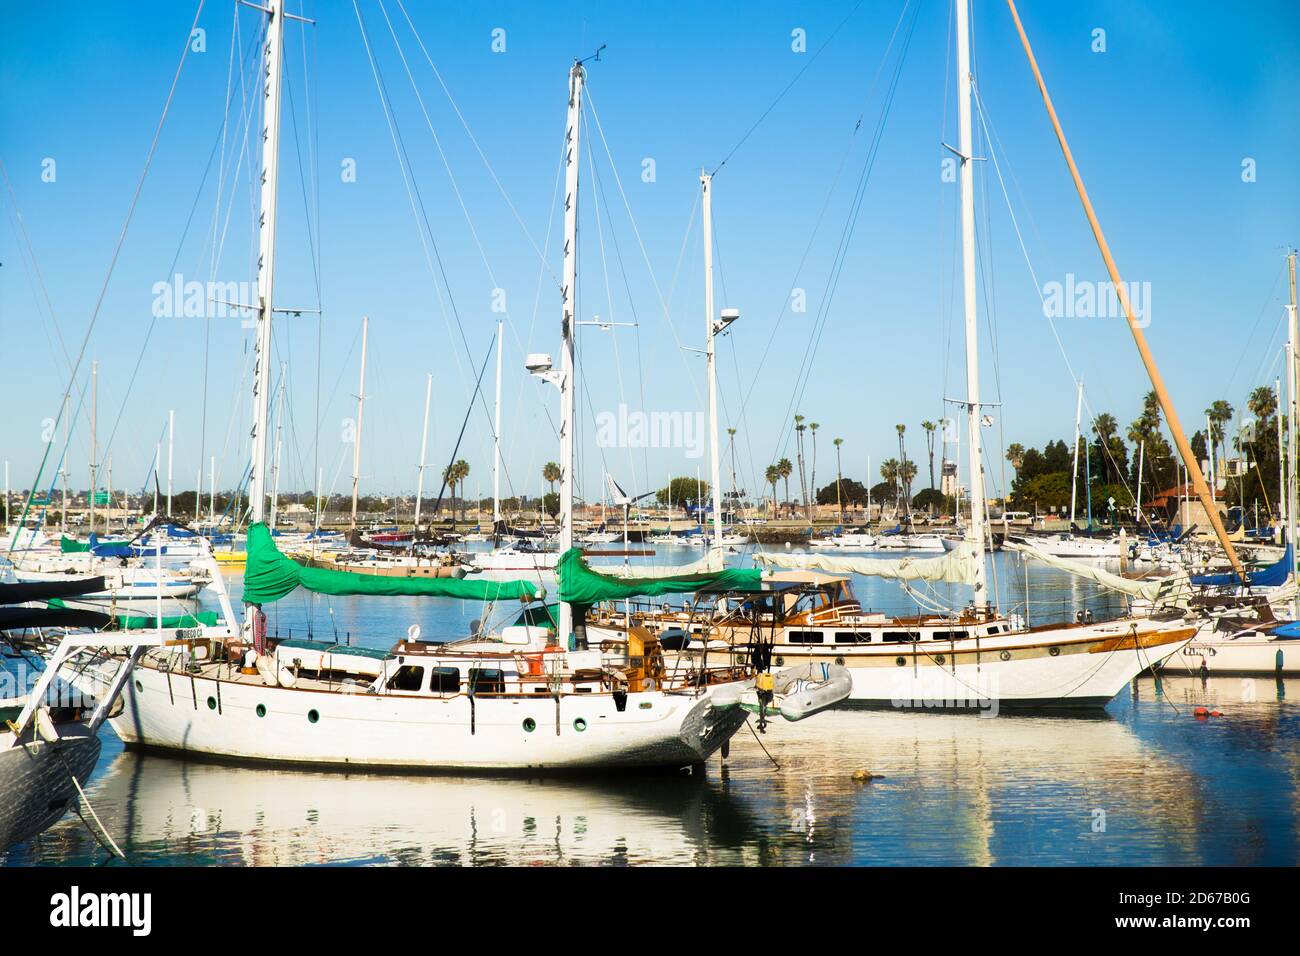 Commercial fishing boats docked in San Diego harbor in a summertime afternoon landscape Stock Photo